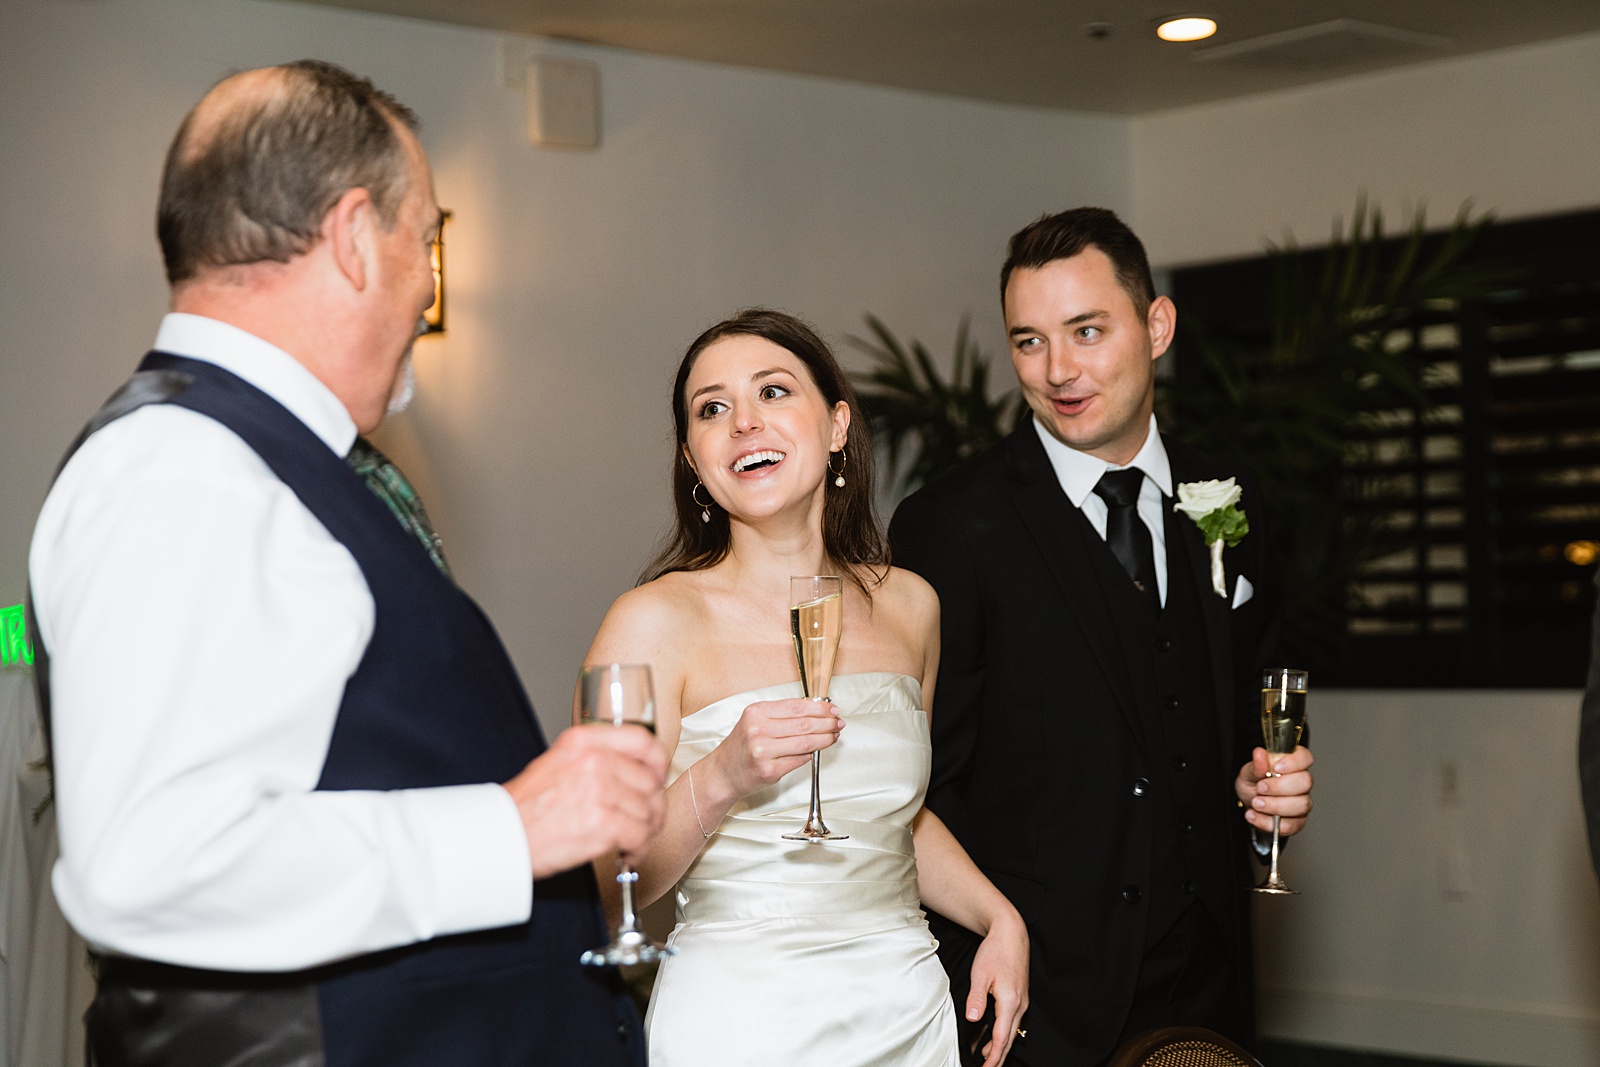 Guests make a toast at The Scott wedding reception by Scottsdale wedding photographer PMA Photography